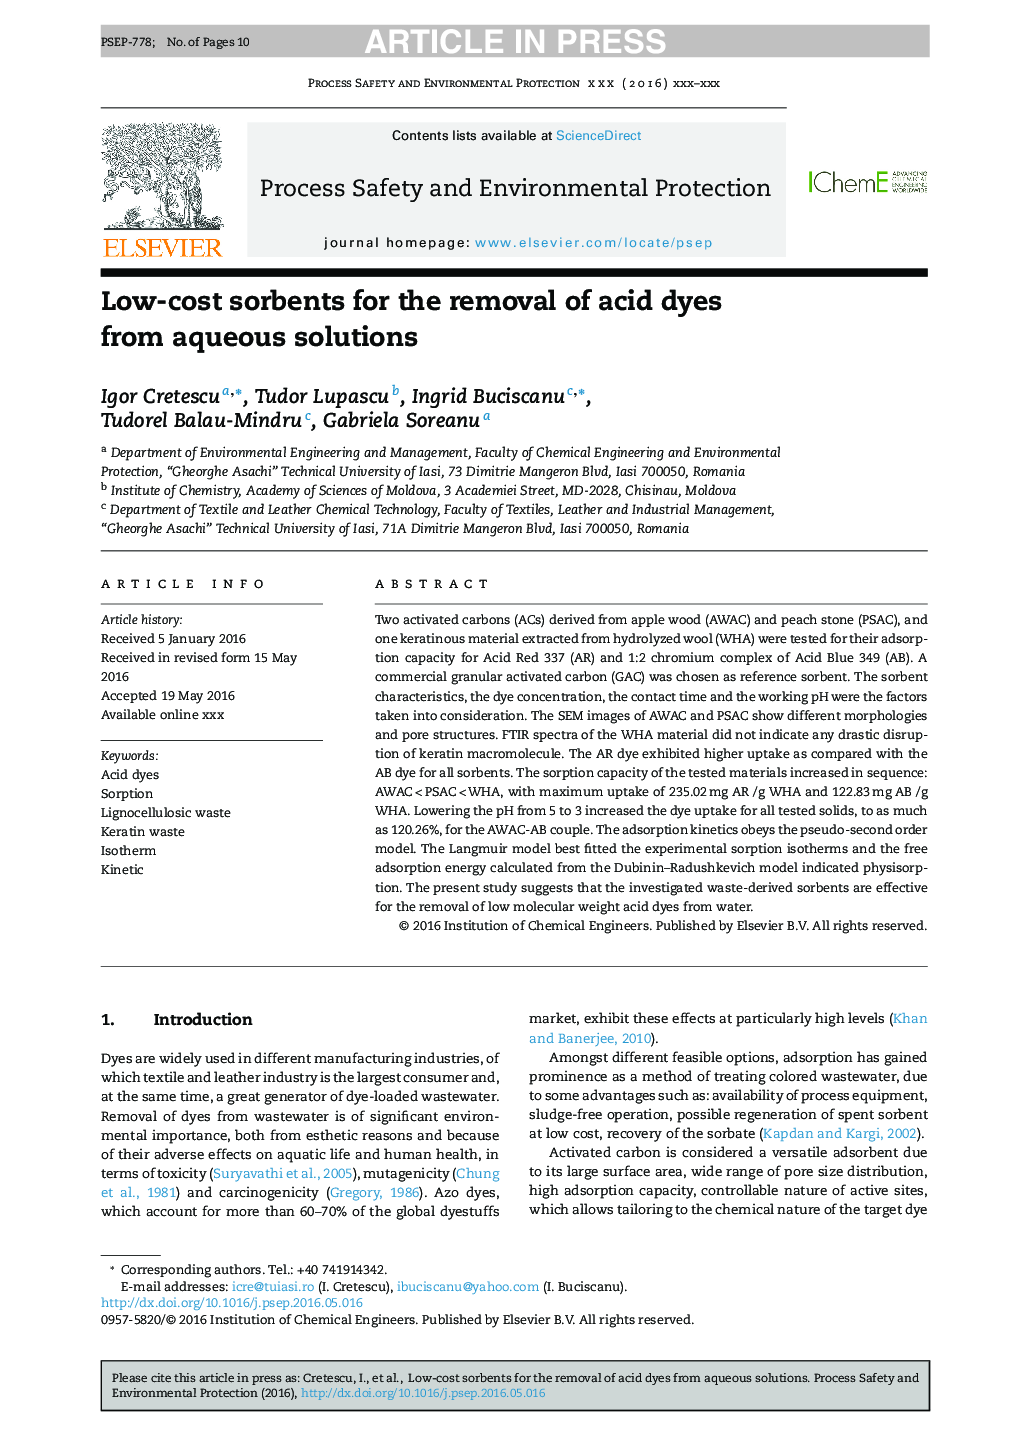 Low-cost sorbents for the removal of acid dyes from aqueous solutions